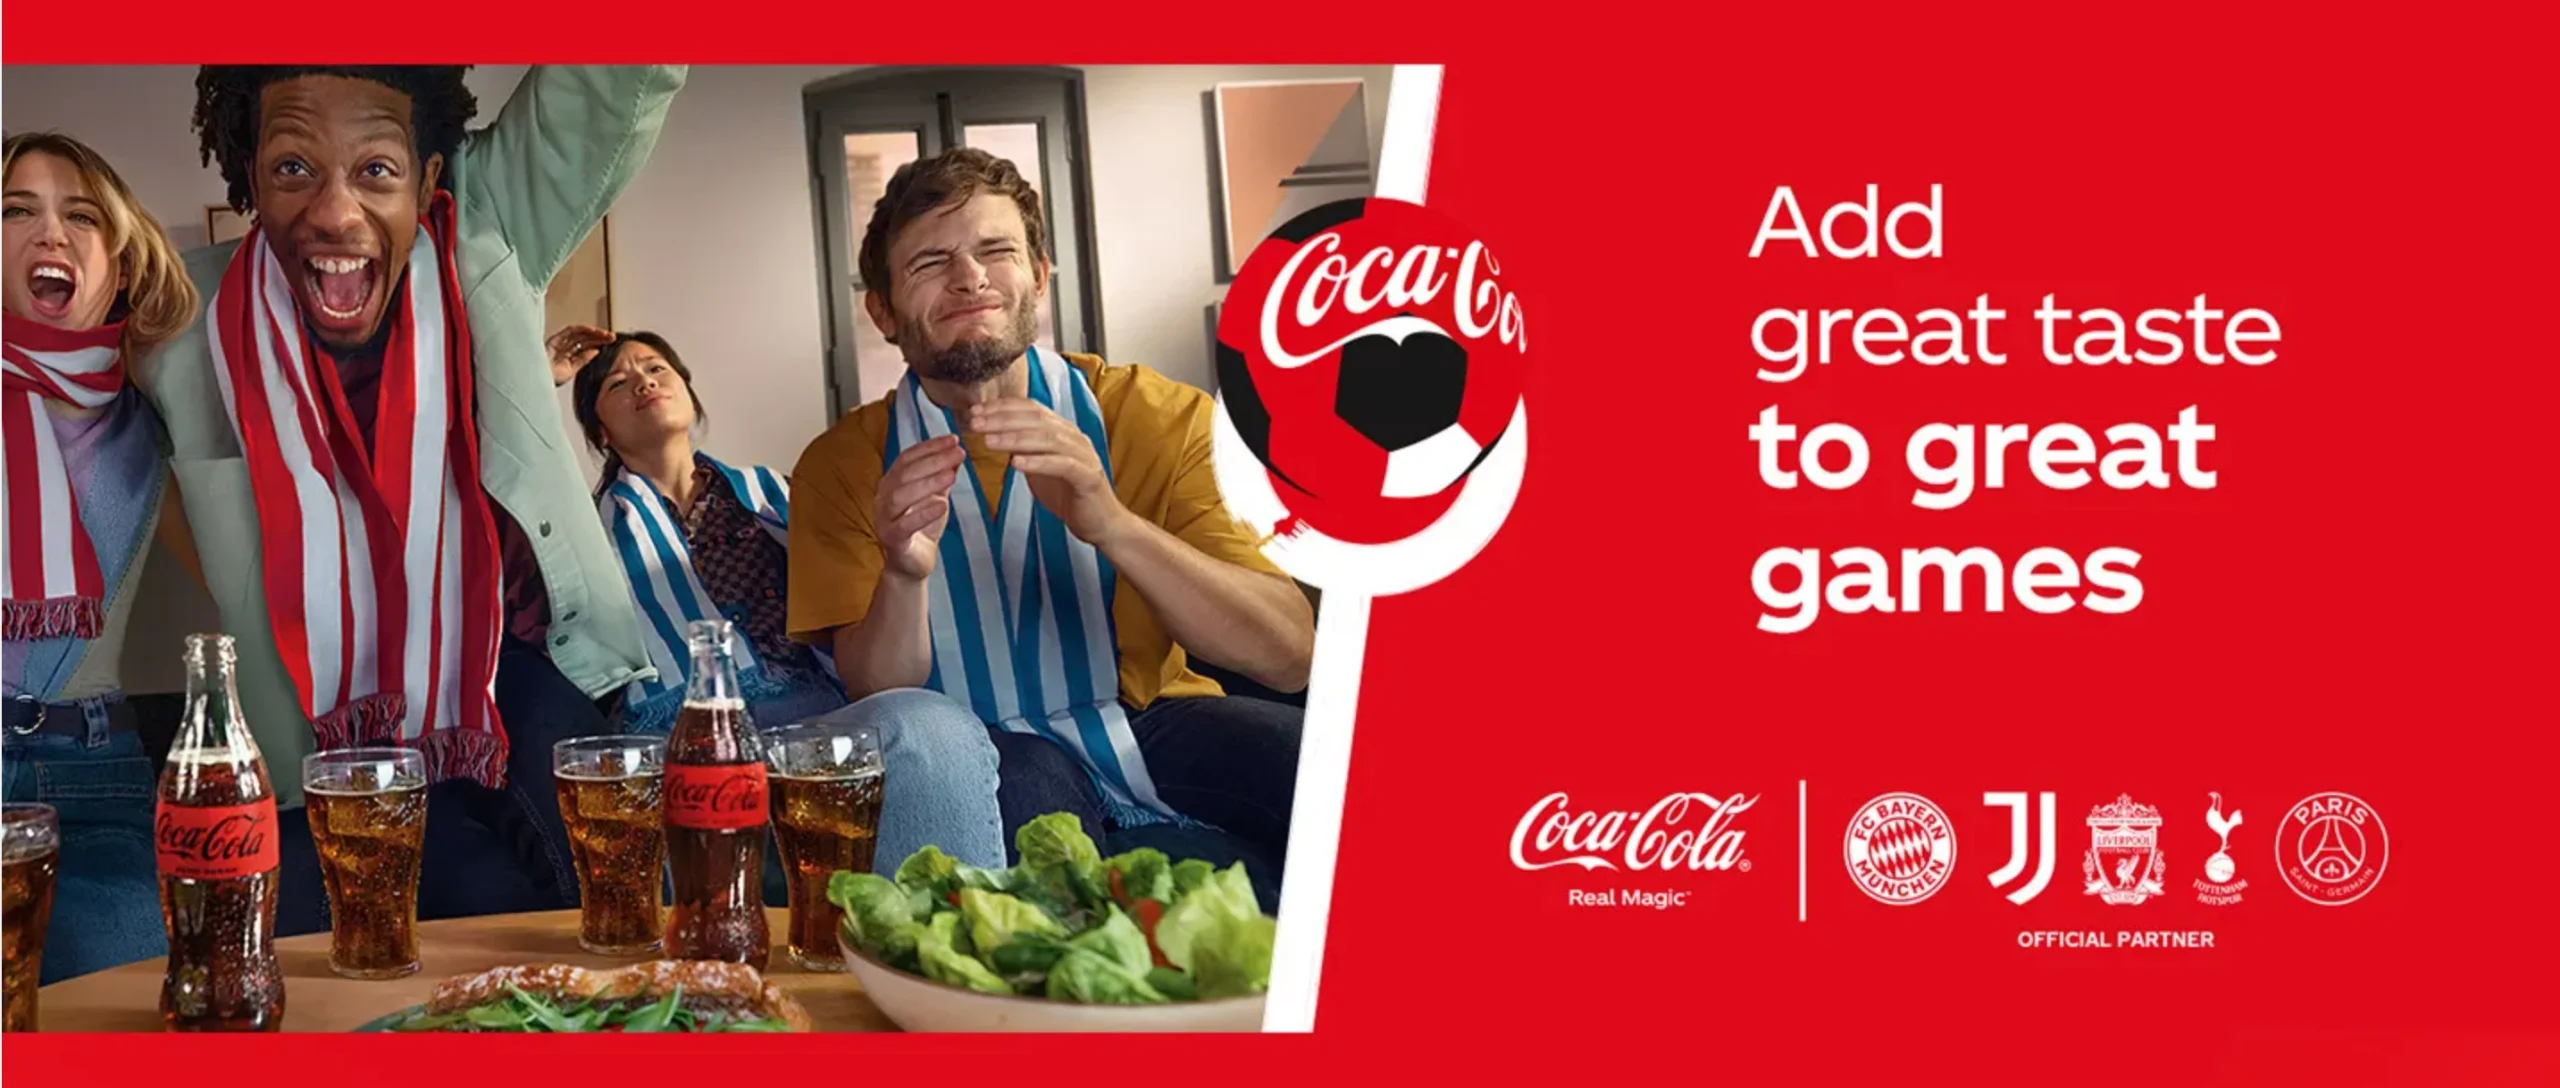 Coca-Cola UVP example with football fans as a target market